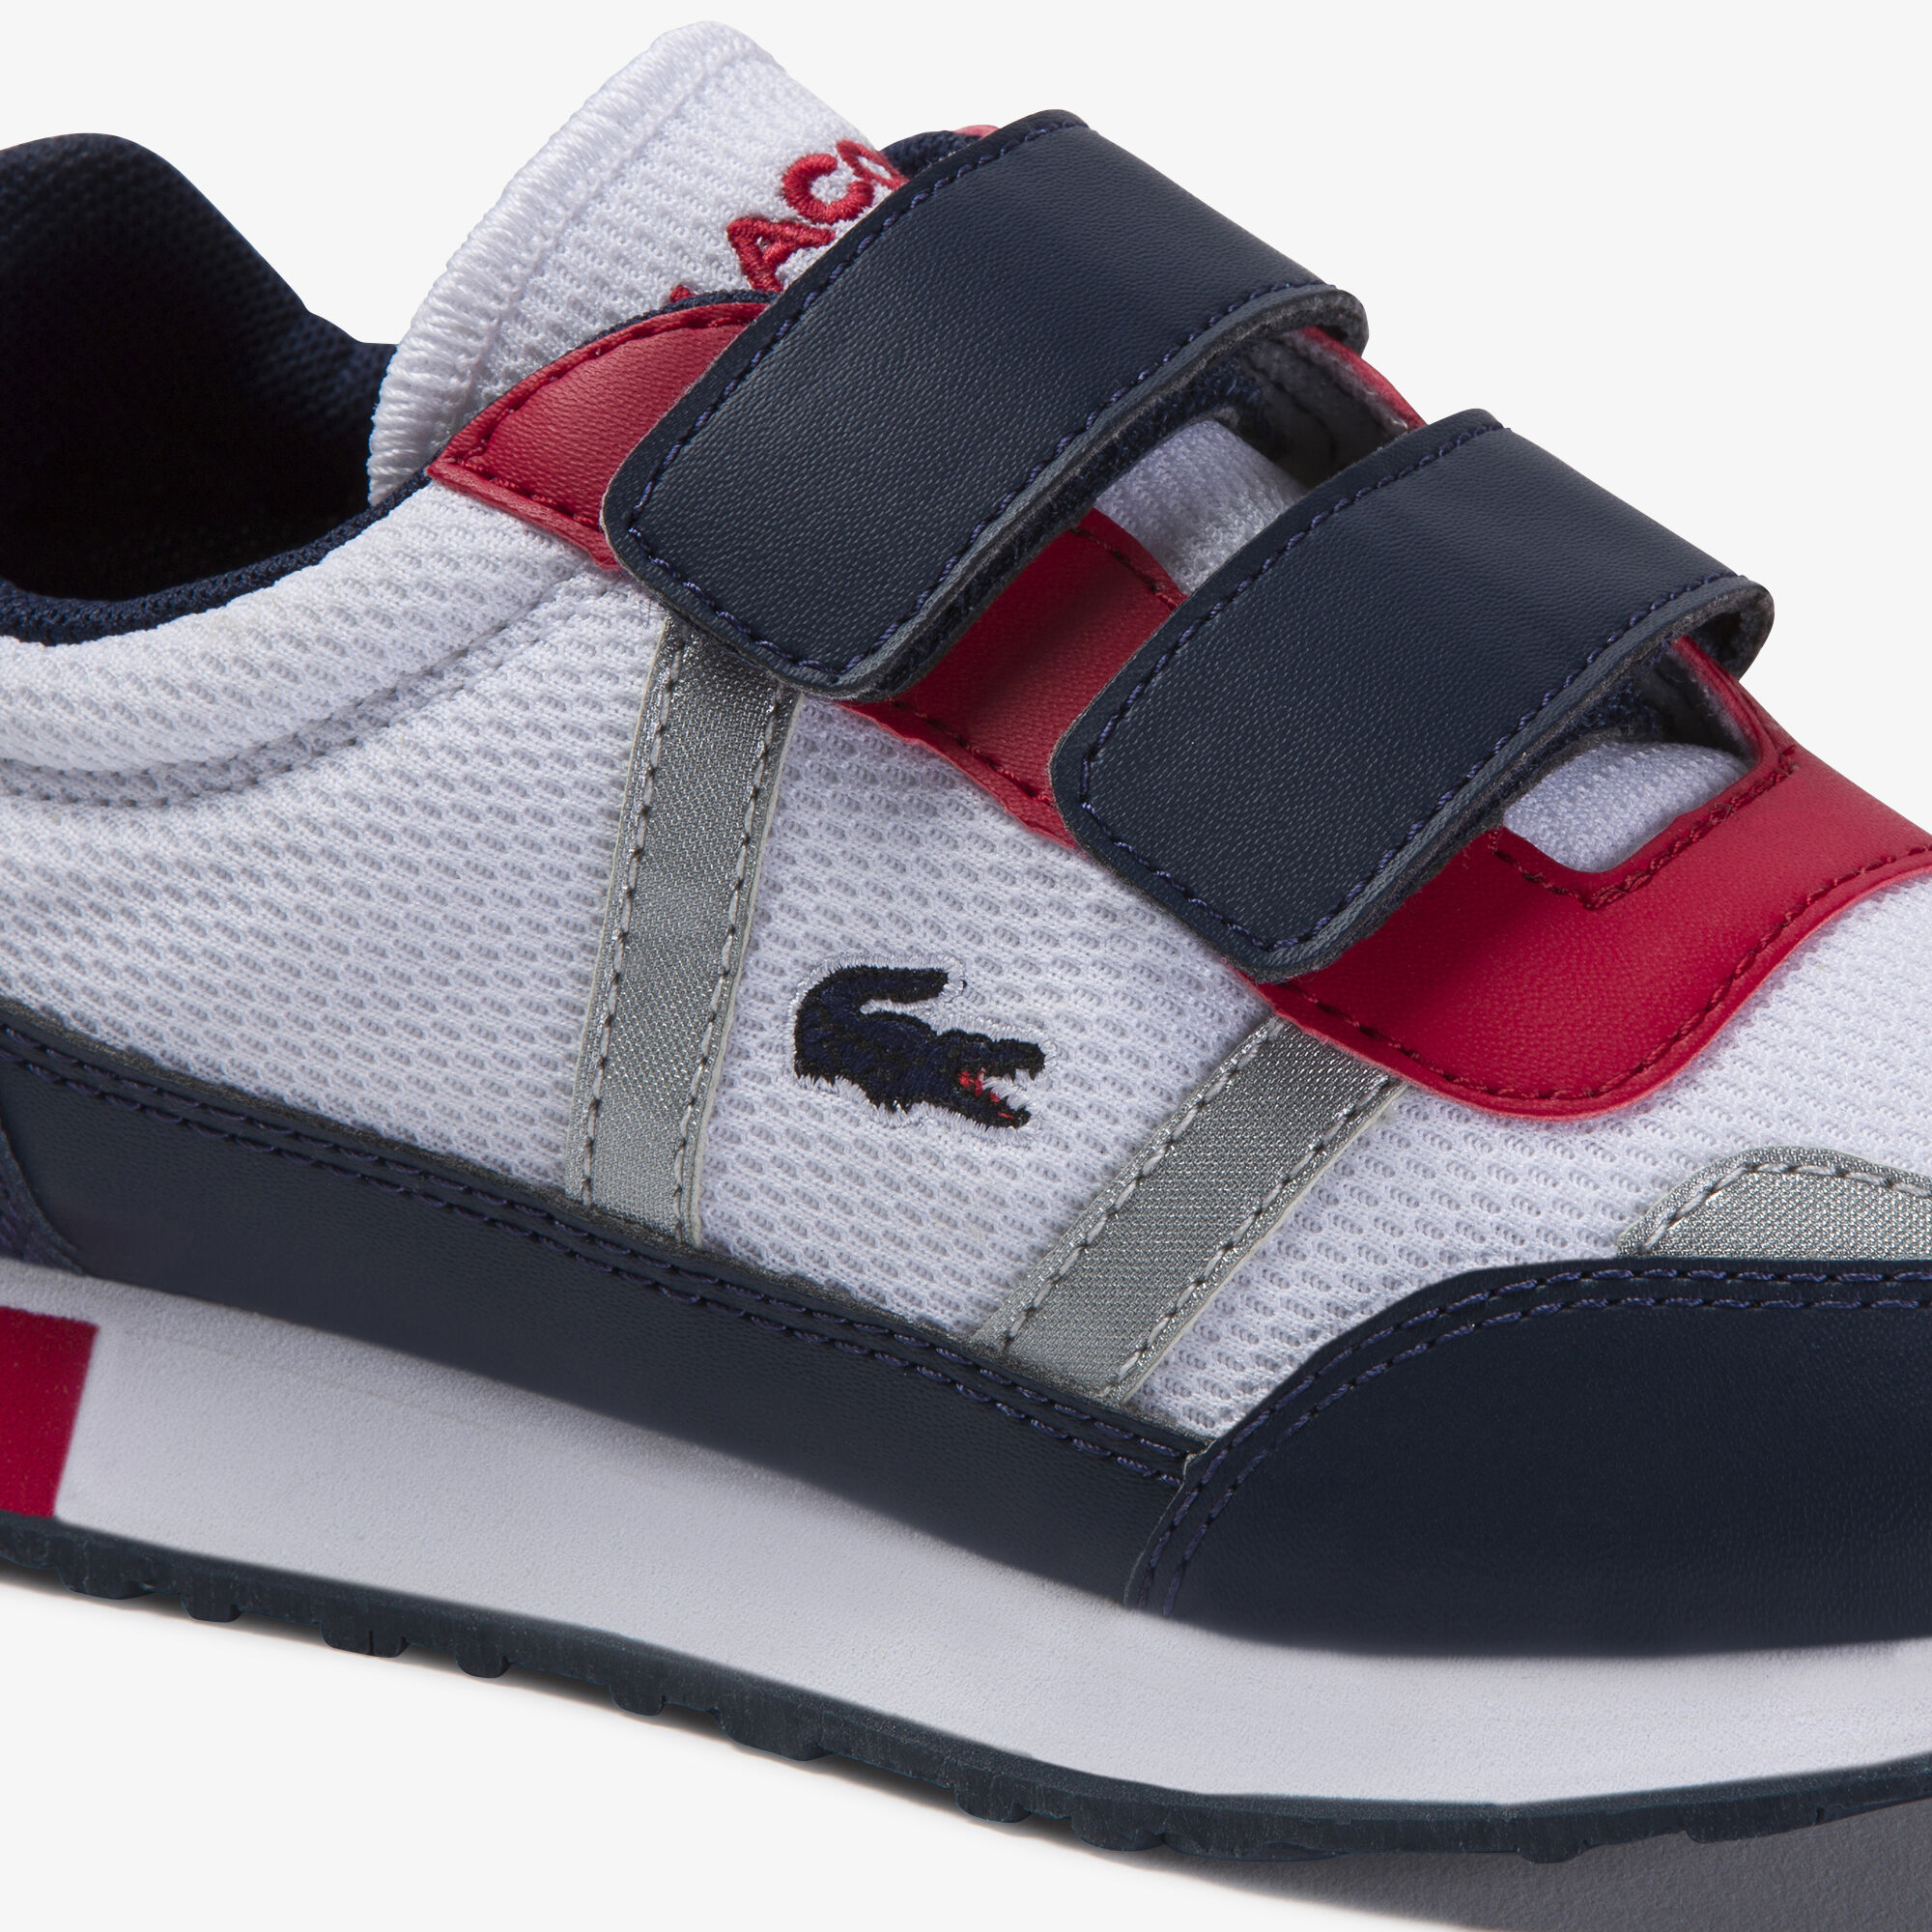 Children's Partner Textile and Synthetic Sneakers